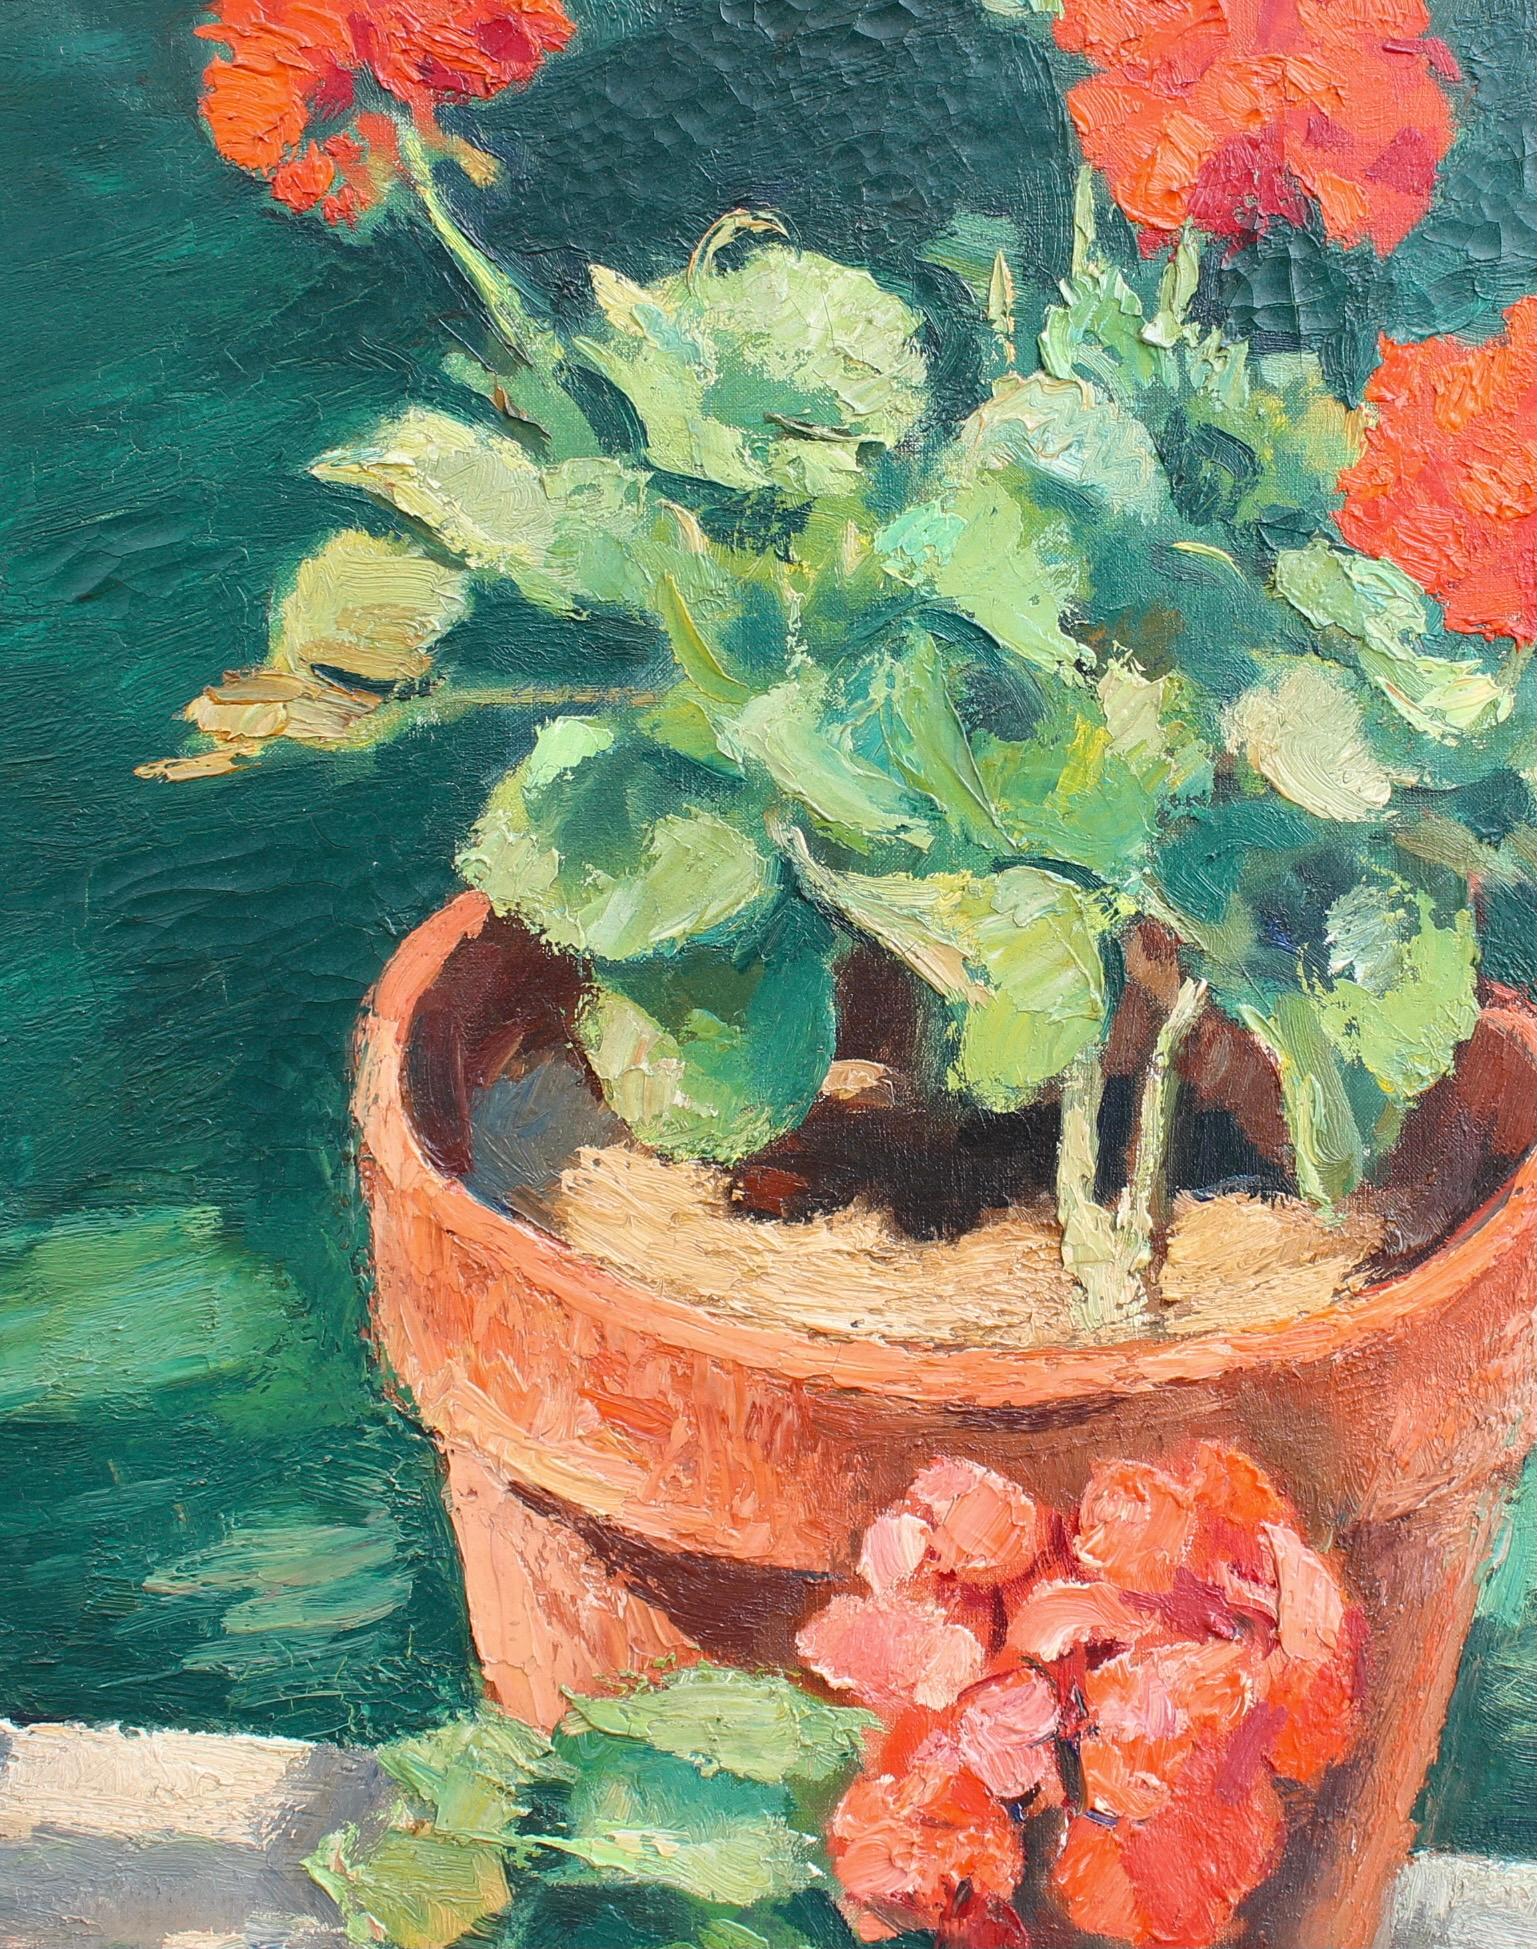 'Potted Flowers', oil on canvas, by Charles Kvapil (1933). Potted red geraniums symbolise happiness, good health, good wishes, and friendship. They are associated with positive emotions. The artist paints the flowers bathed in radiant light sitting